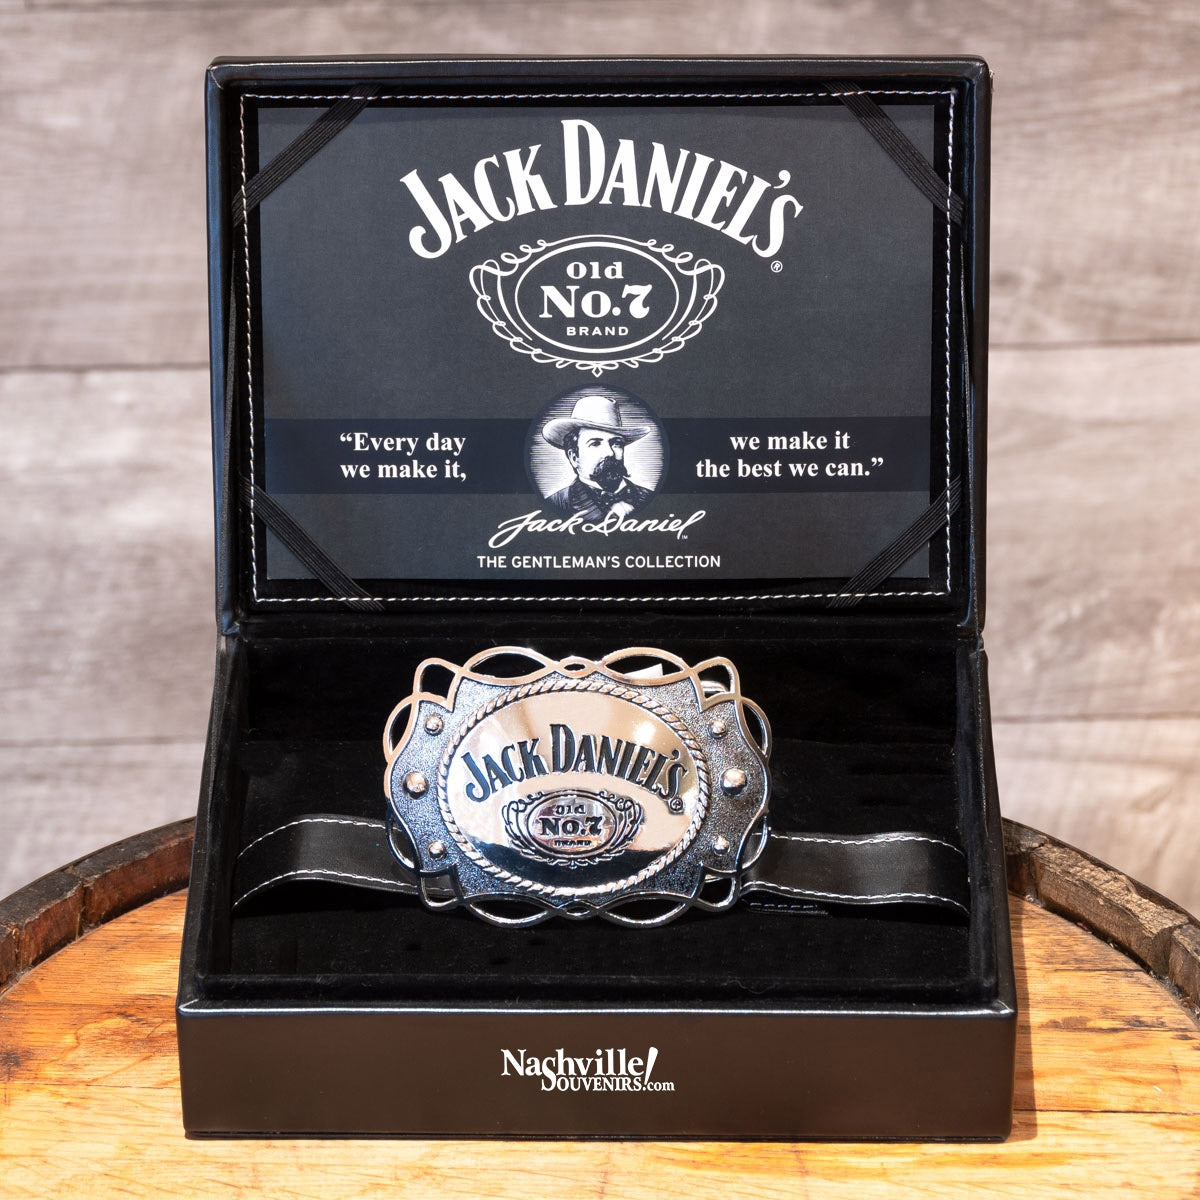 Amazing new hand crafted Ornate Jack Daniel's Swing Logo Belt Buckle. Part of the premium line of Jack Daniel's buckles called "The Gentleman's Collection". Each one is hand crafted creating a unique work of art. Ships FREE within the continental U.S.